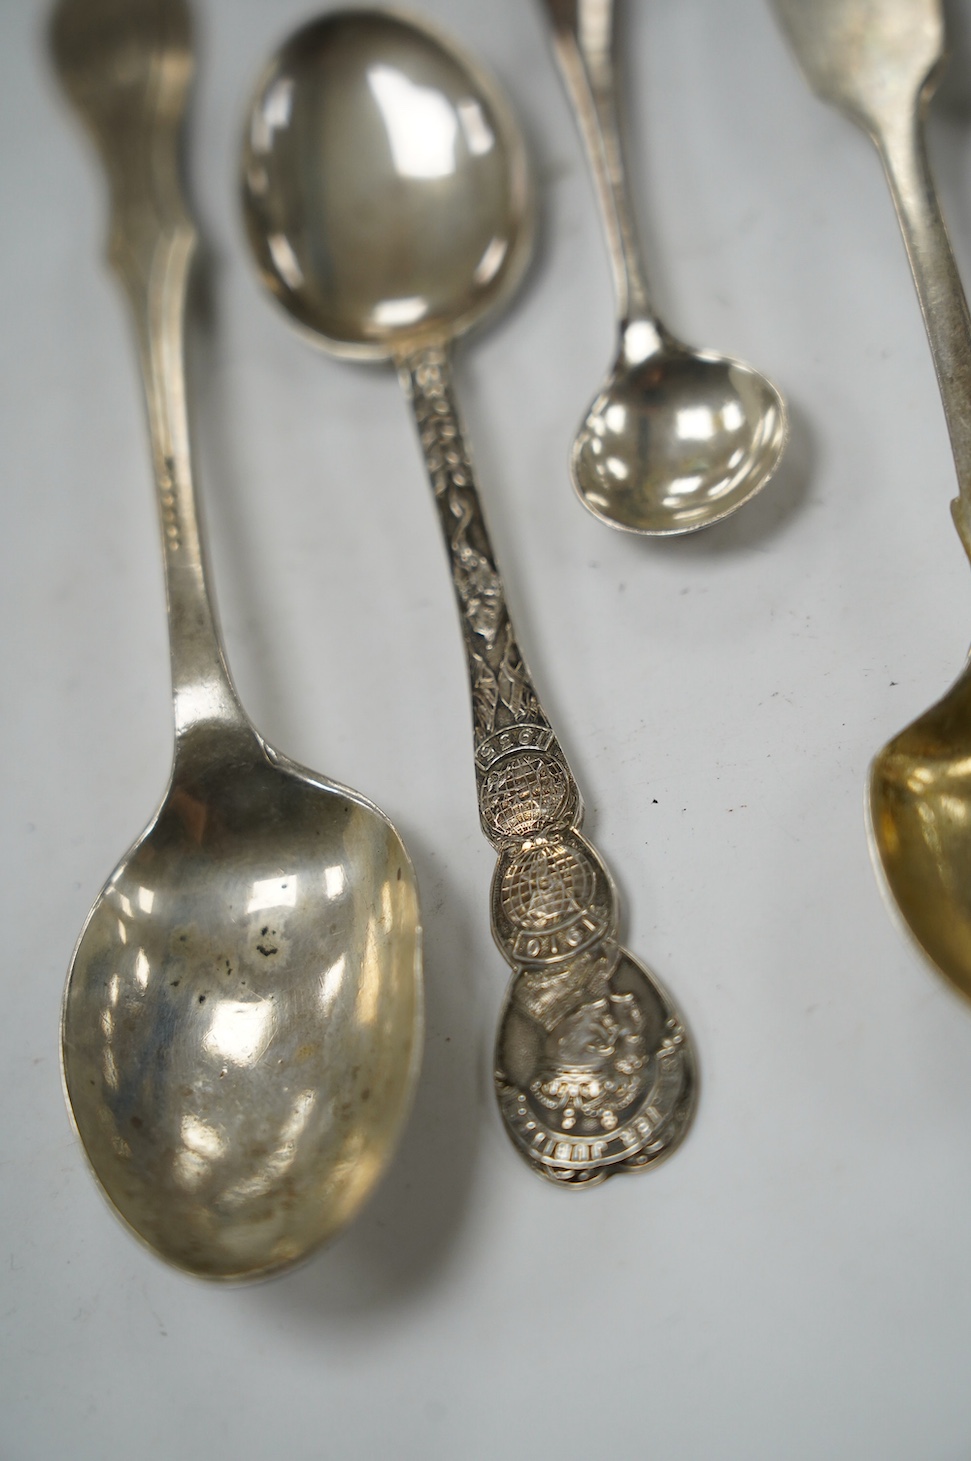 An early 18th century Hanovarian rat-tail pattern table spoon, indistinct marks, 19.6cm and a small quantity of later assorted silver flatware, 21.7oz. Condition - poor to fair